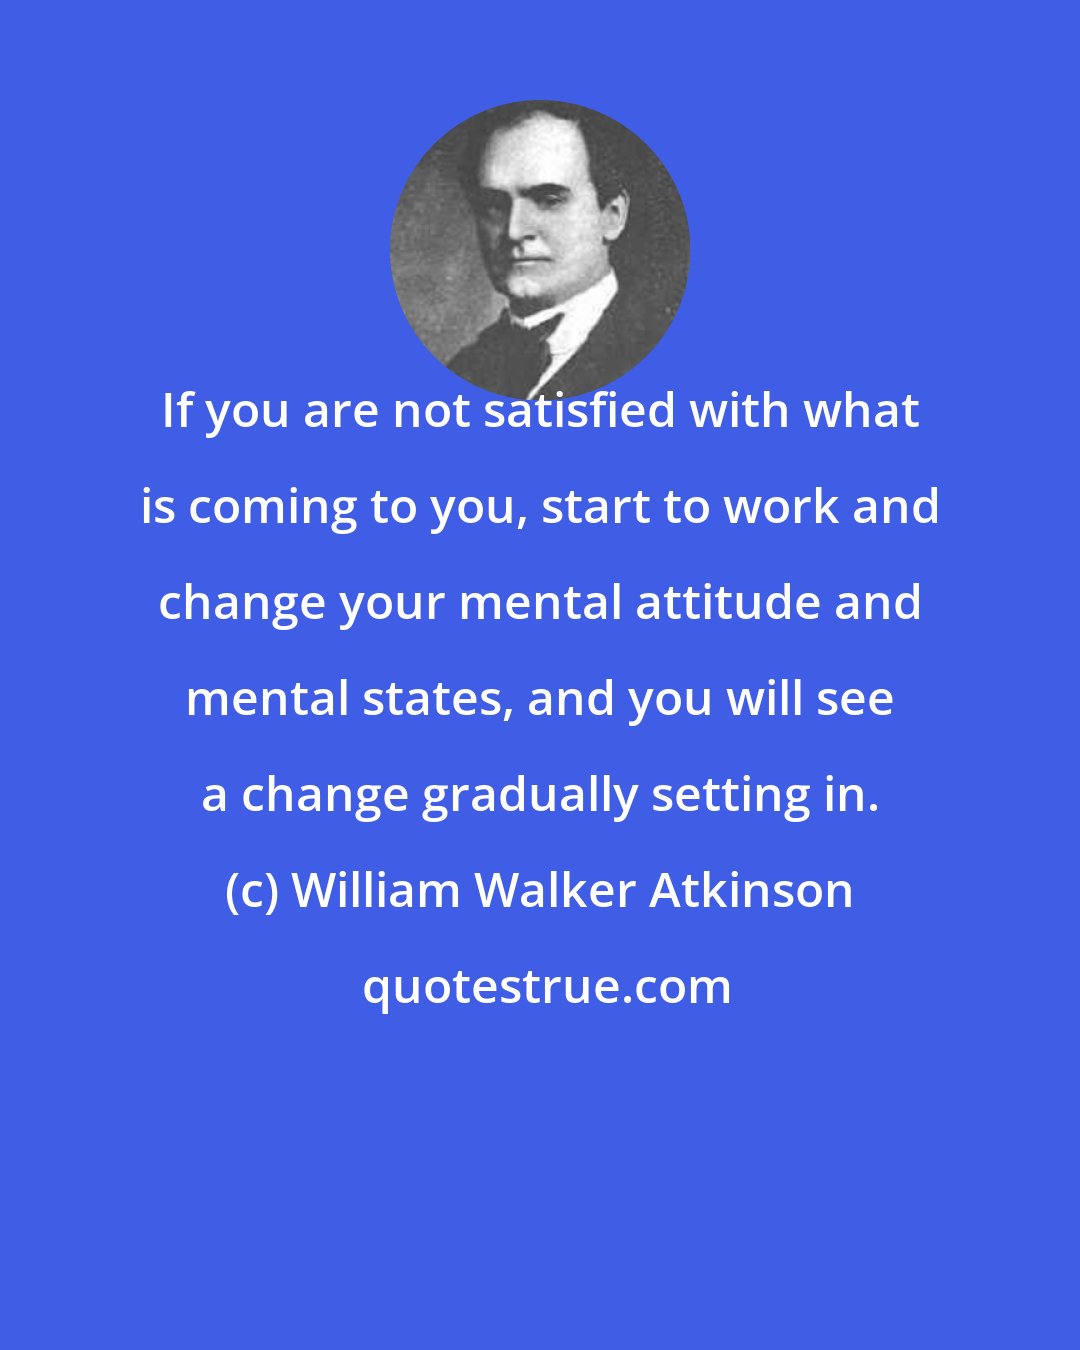 William Walker Atkinson: If you are not satisfied with what is coming to you, start to work and change your mental attitude and mental states, and you will see a change gradually setting in.